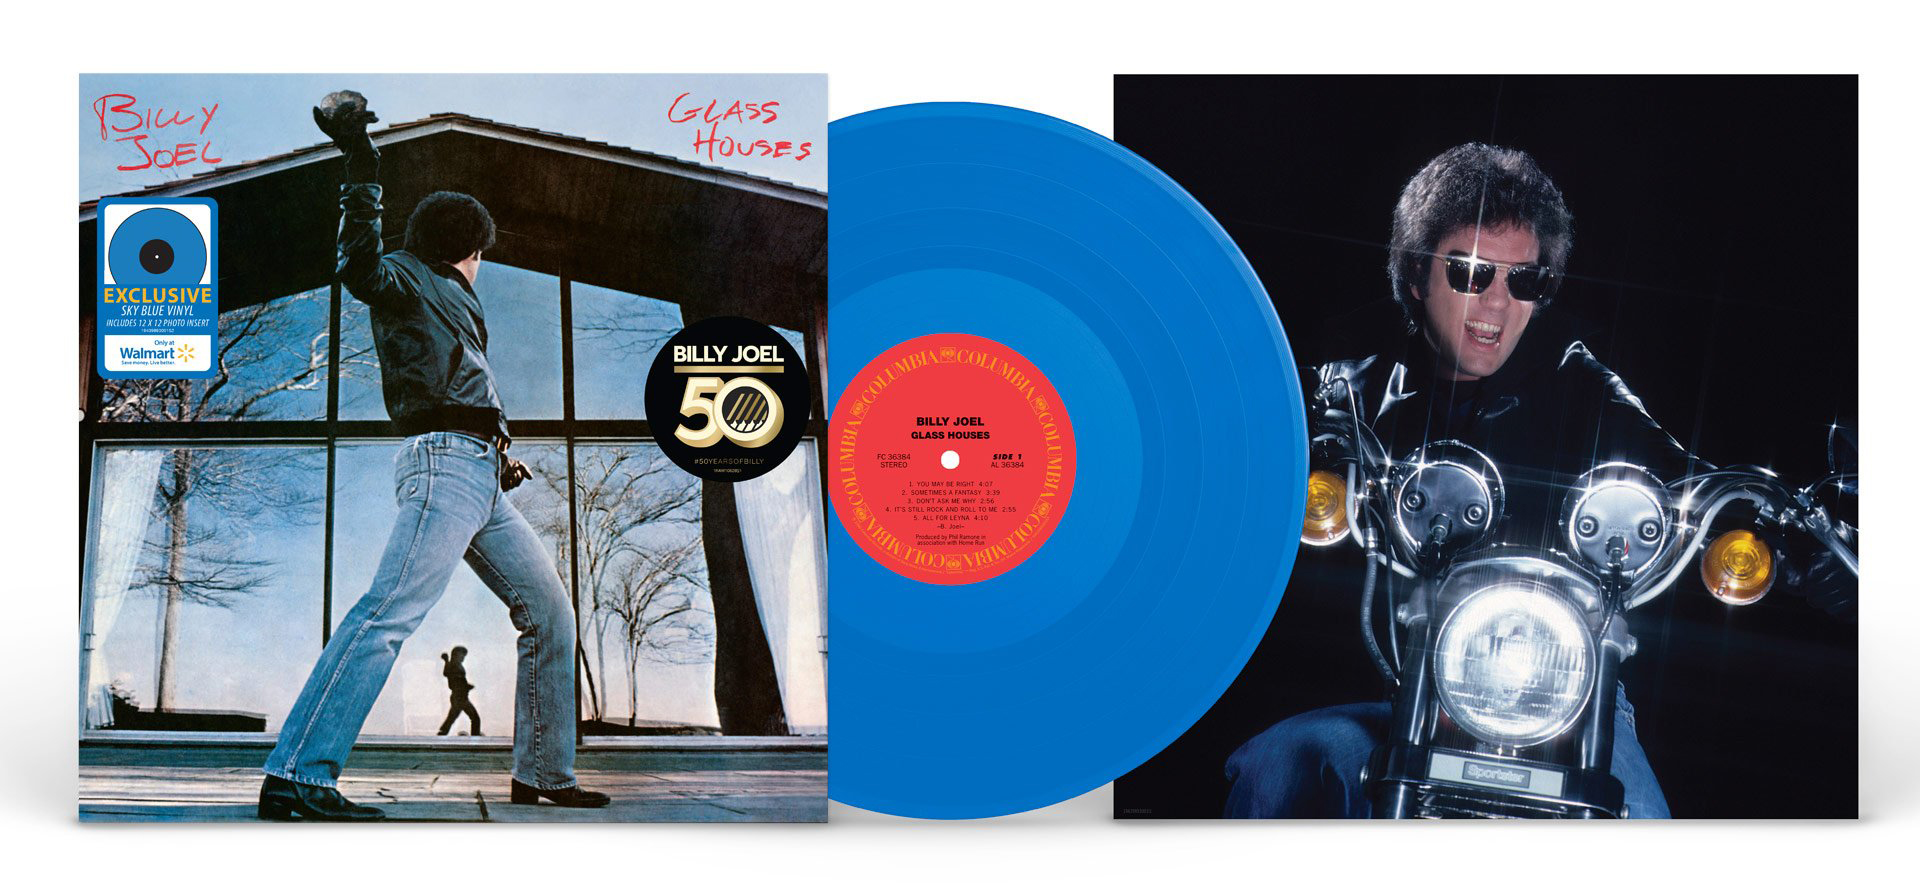 Billy Joel's 1980 record "Glass Houses," shown here in blue vinyl from Walmart